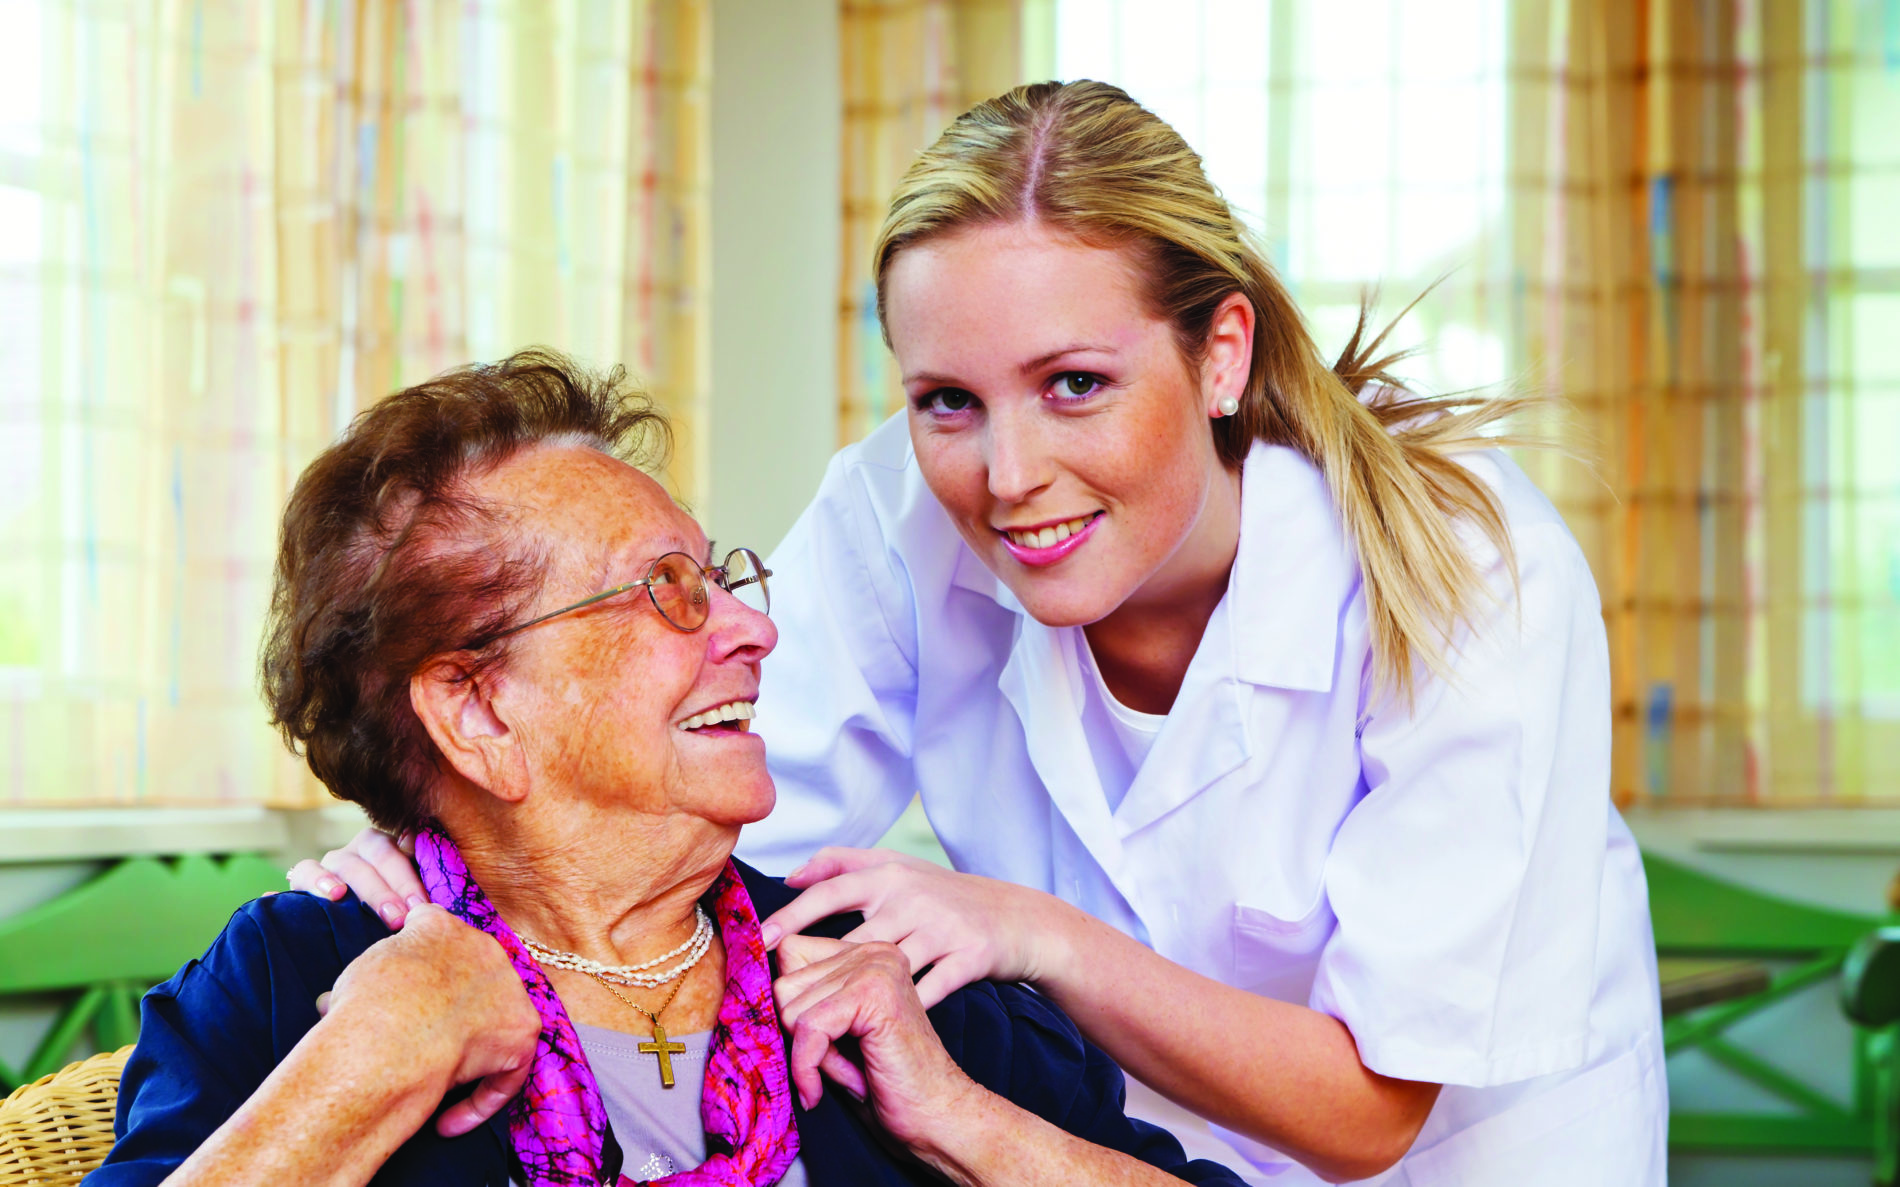 A woman resident smiling at her nurse, as her nurse looks and smiles at the camera.